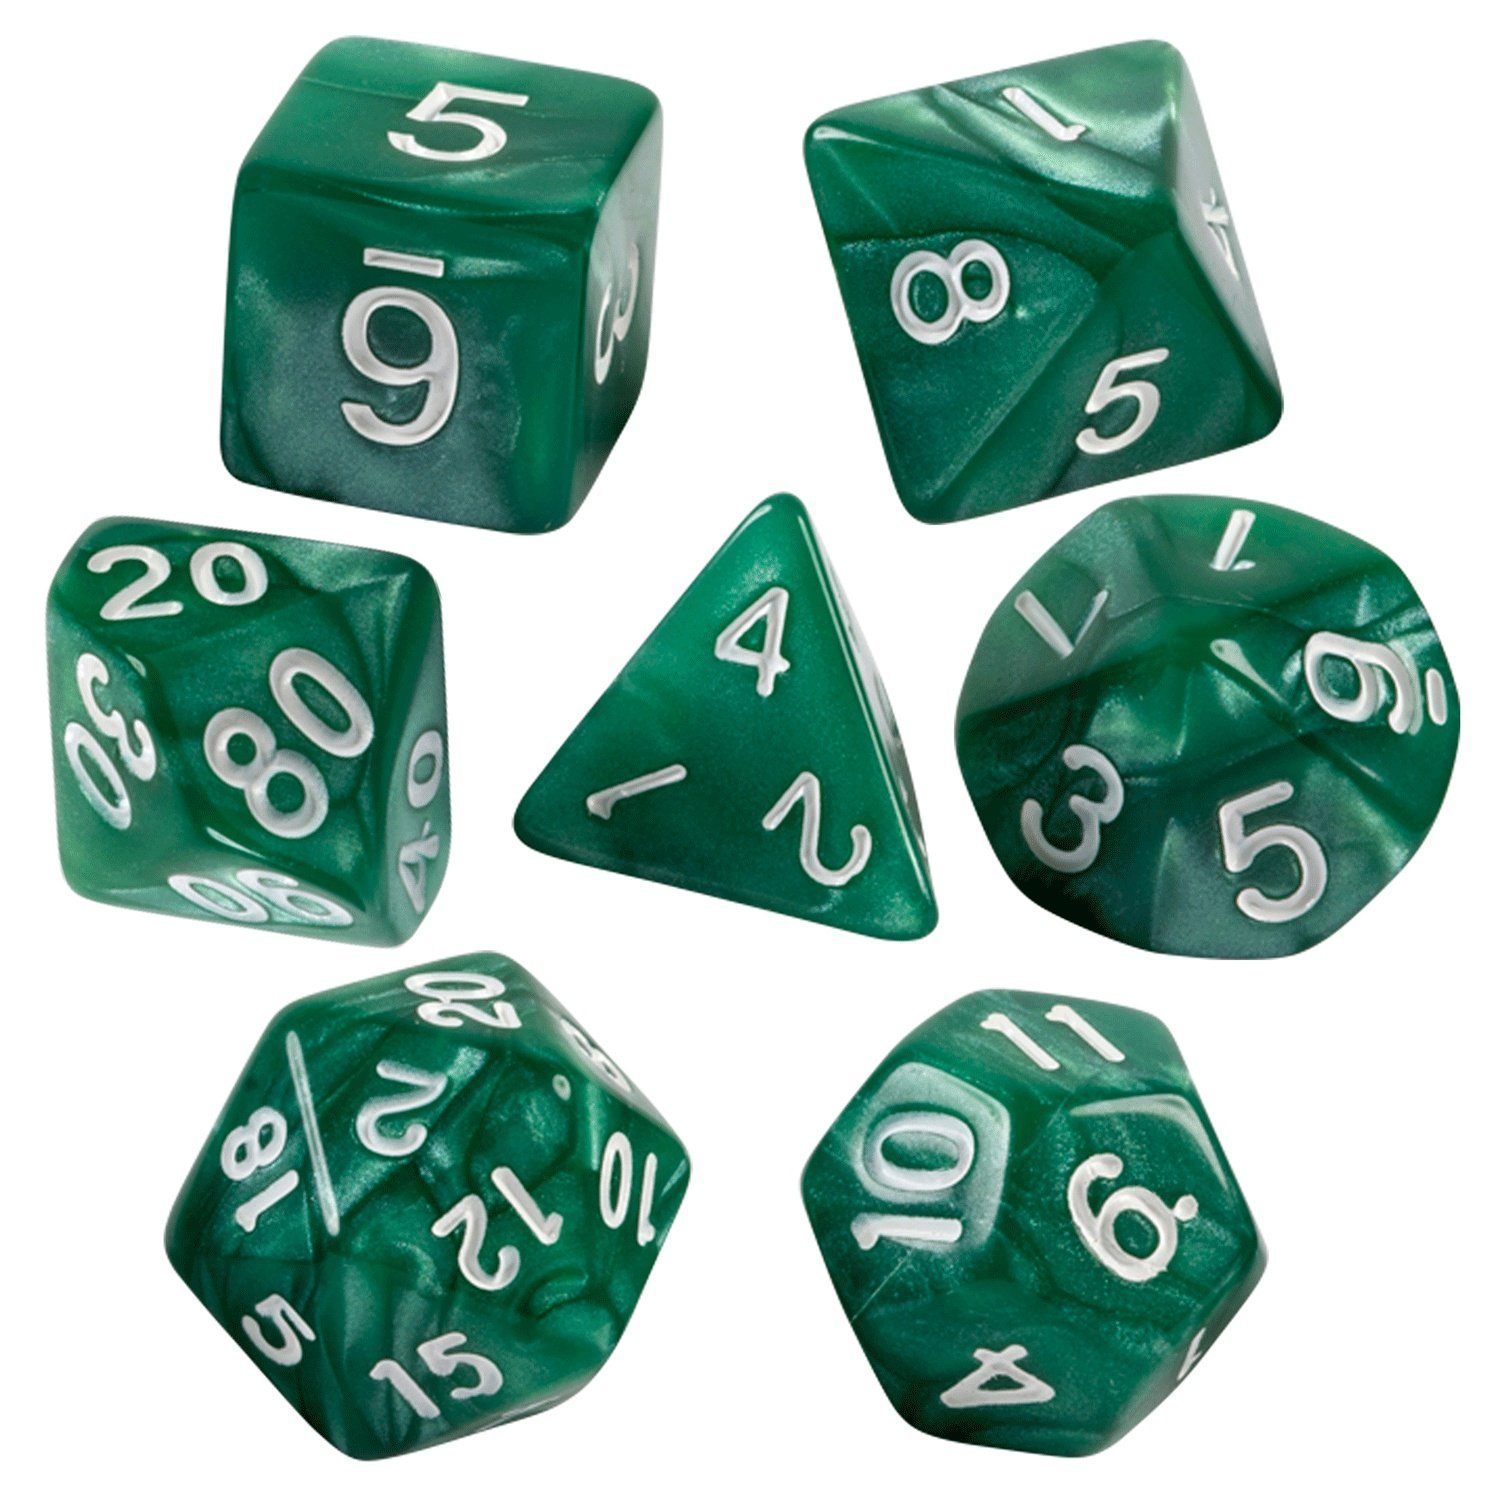 Green Marbled Dice - 7 Piece Set